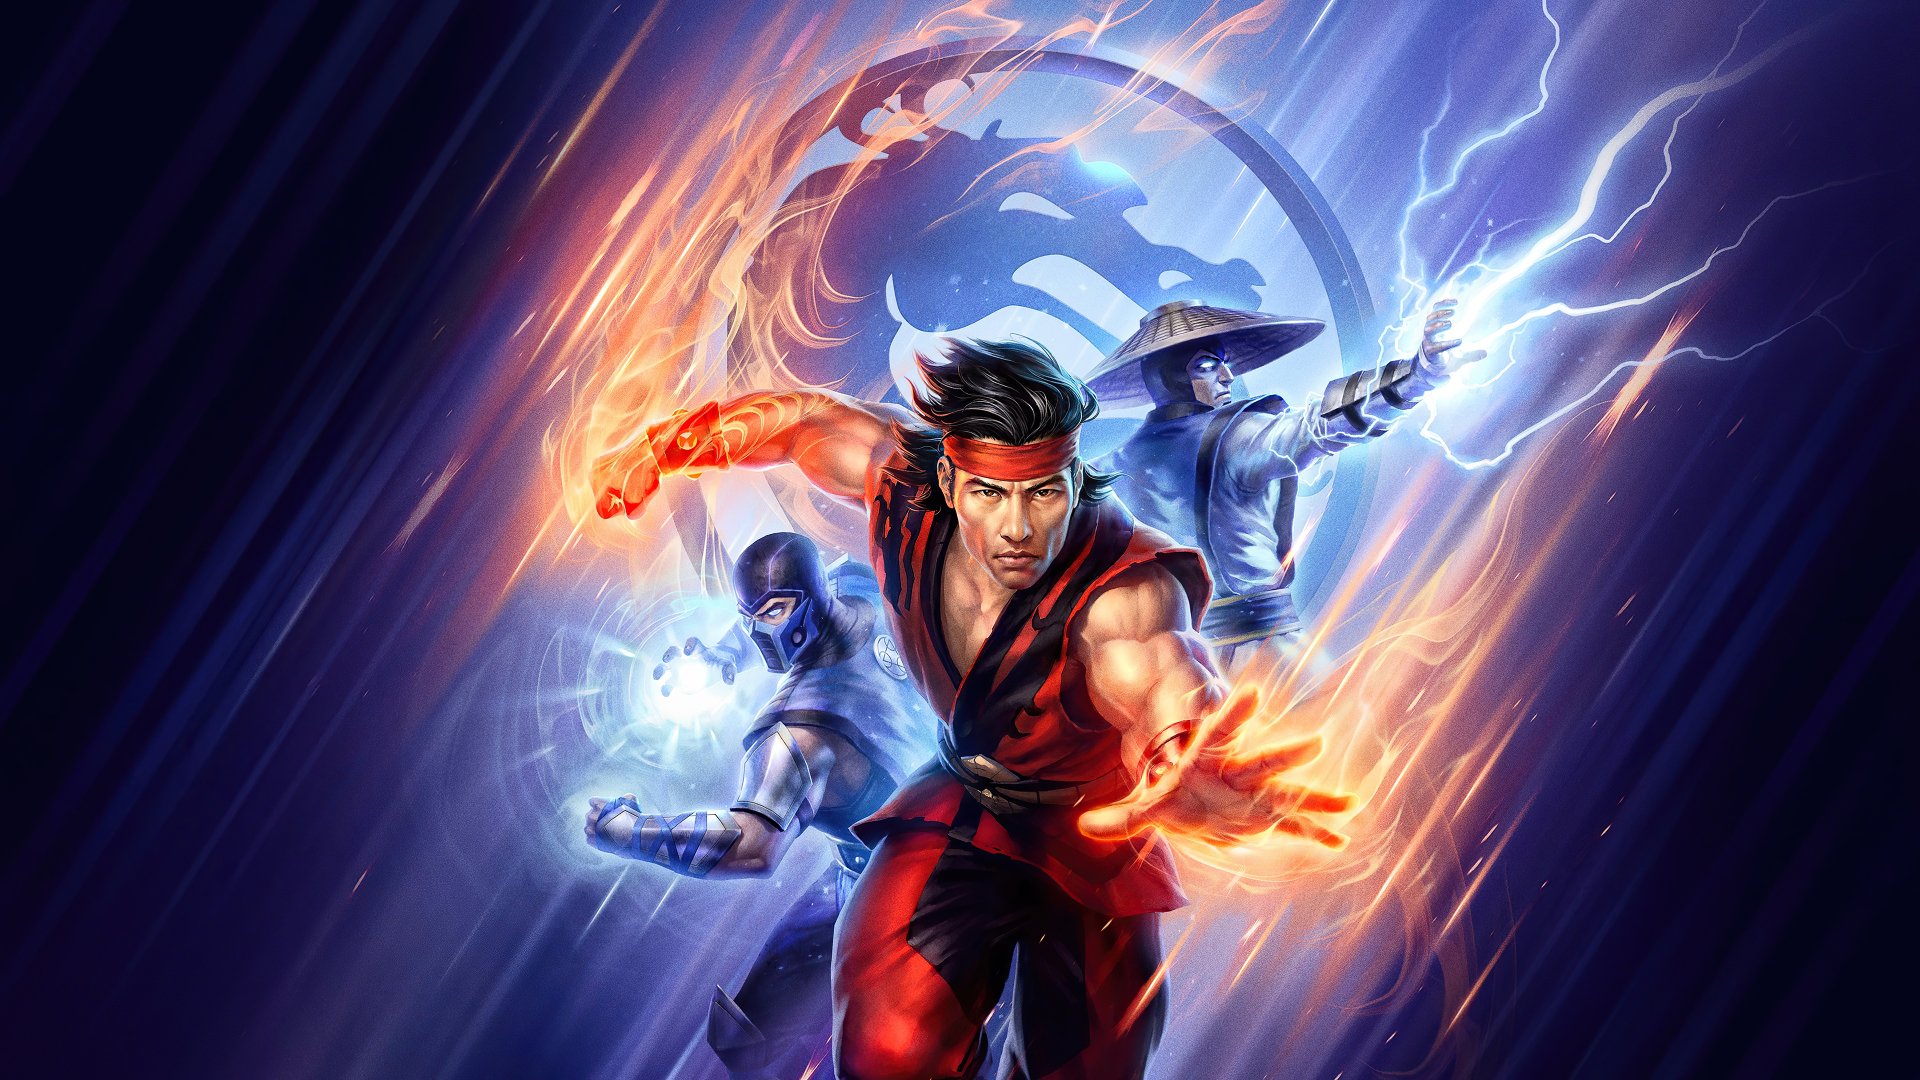 Mortal Kombat Legends: Battle of the Realms HD Wallpaper and Background